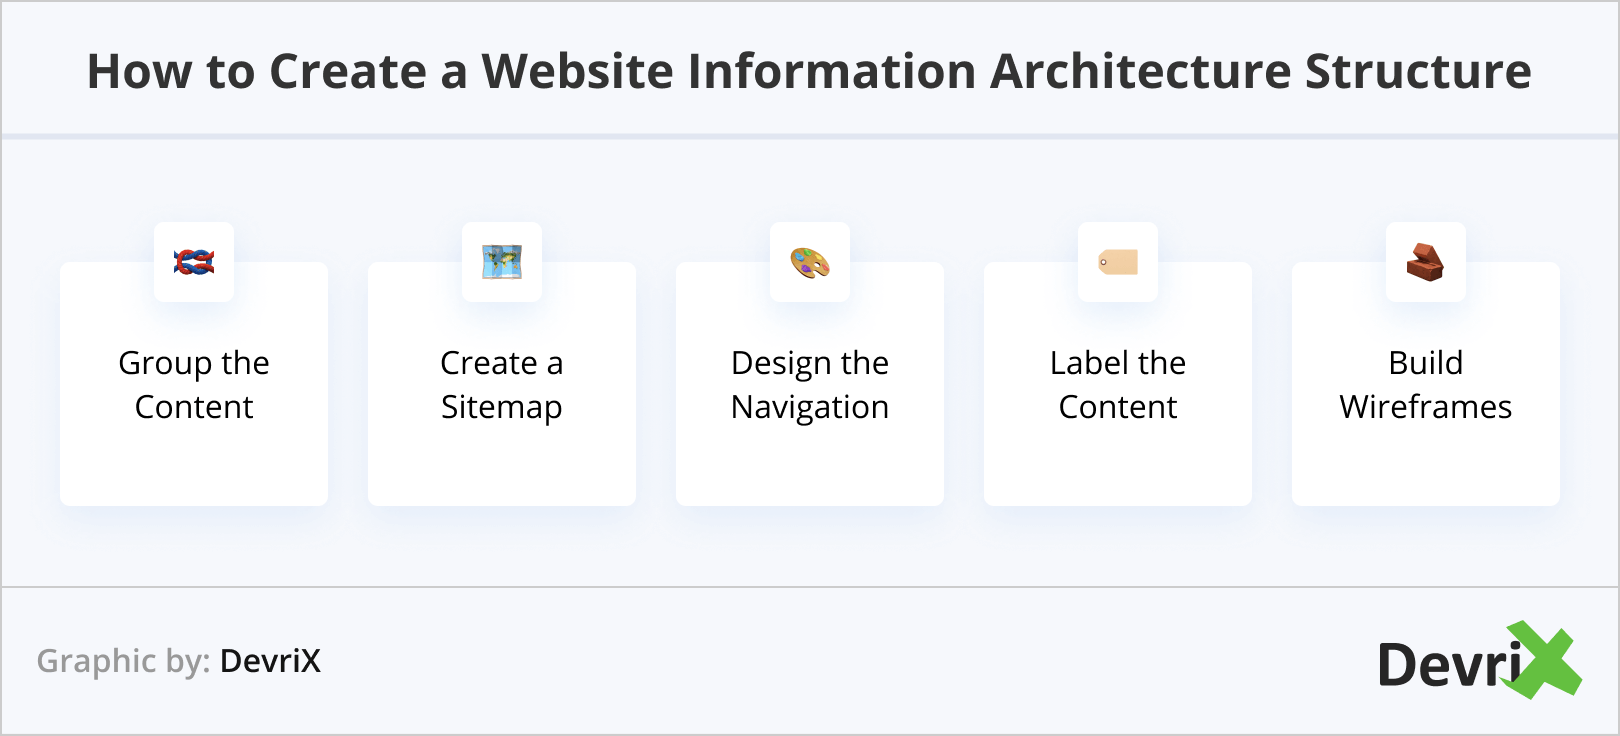 How to Create a Website Information Architecture Structure